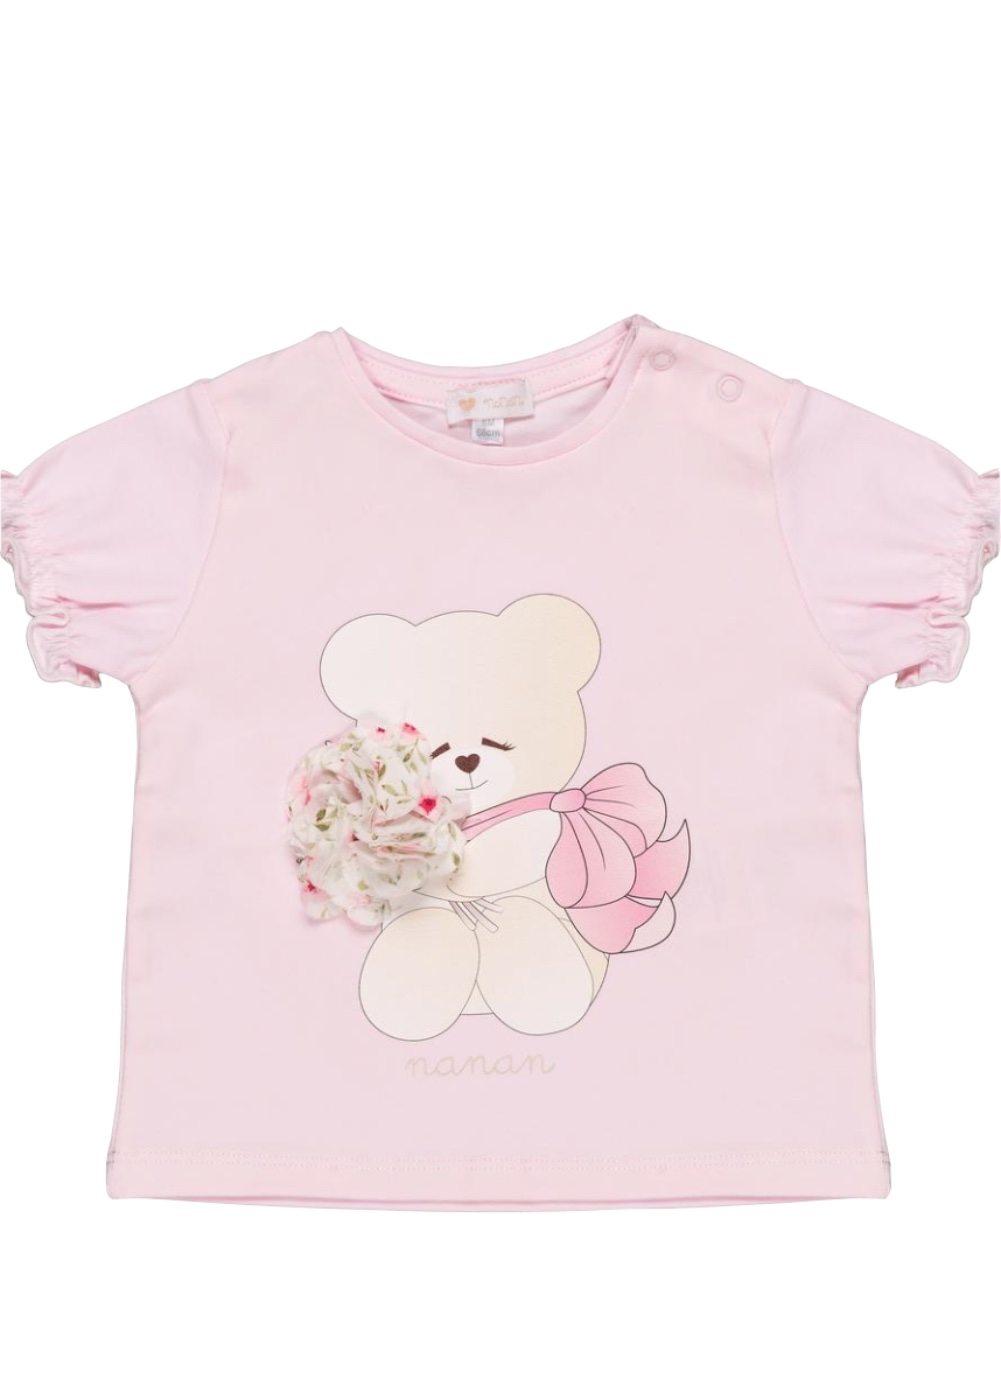 Featured image for “NANÁN T-SHIRT "PRETTY BABY"”